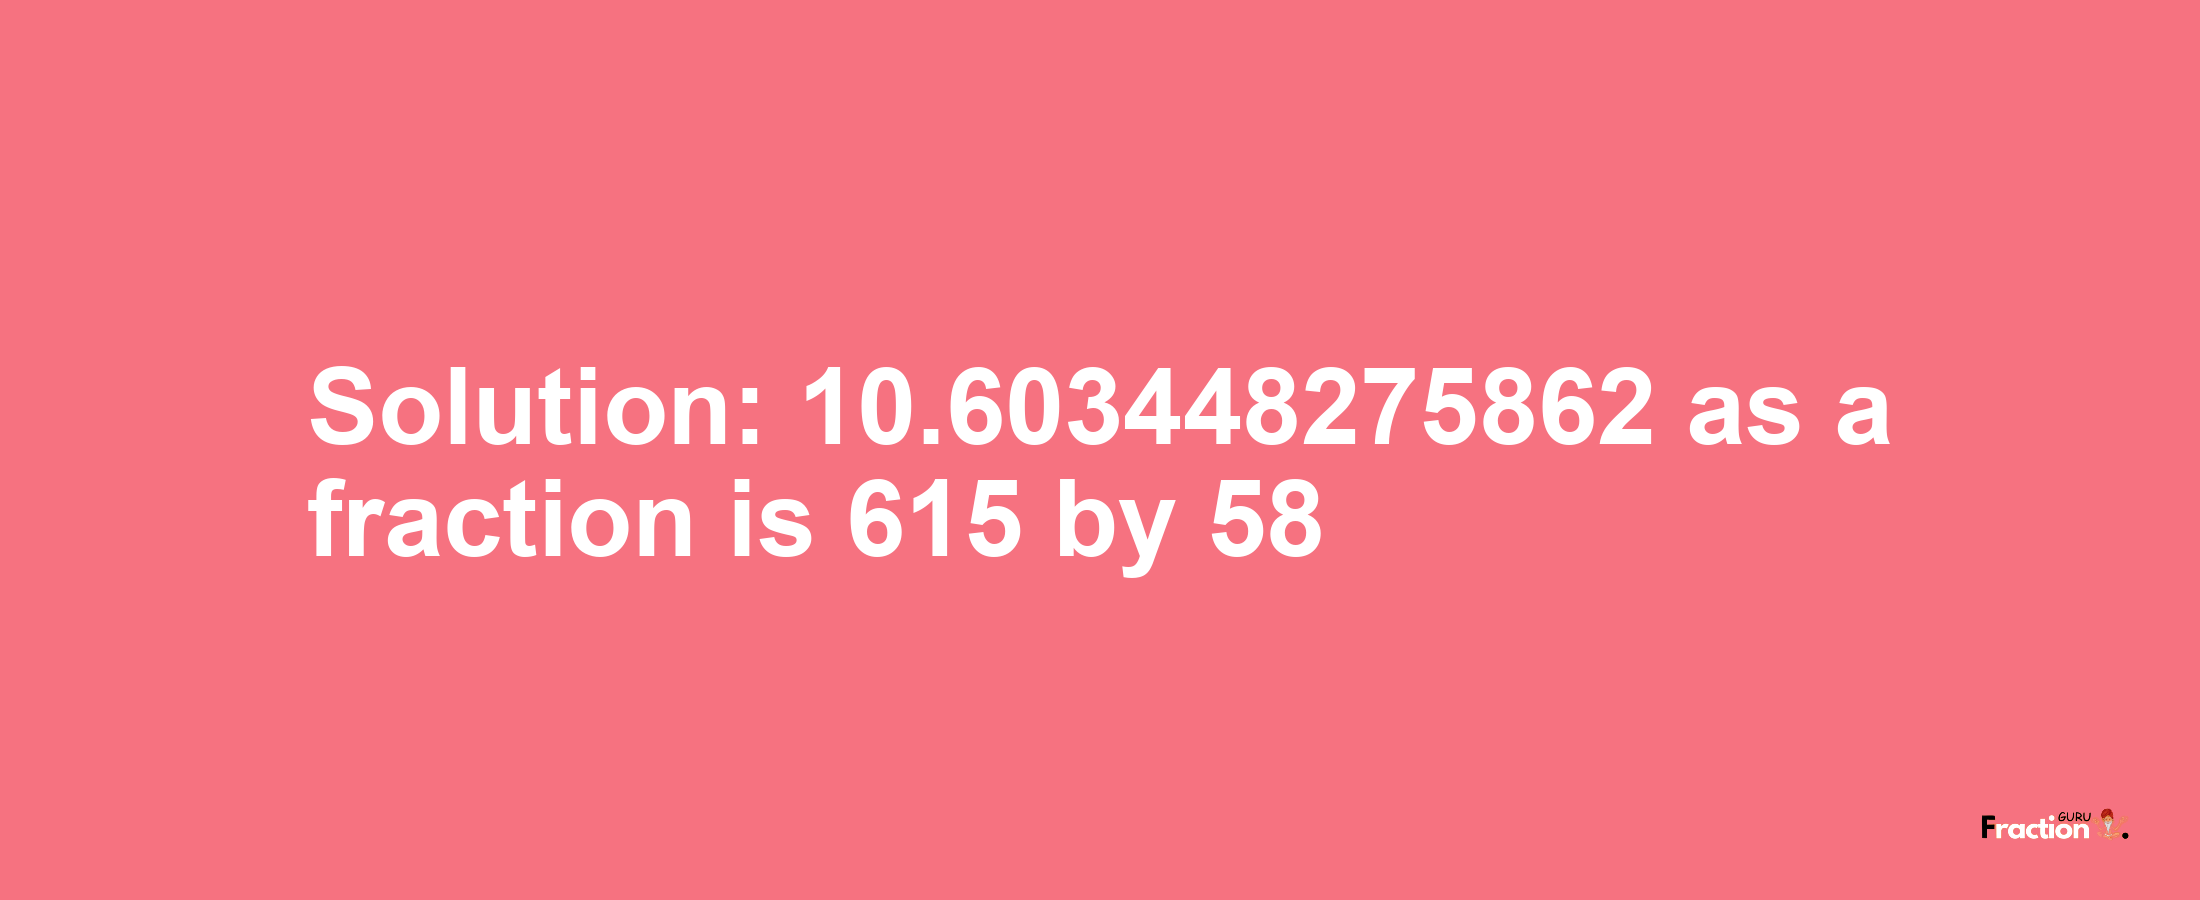 Solution:10.603448275862 as a fraction is 615/58